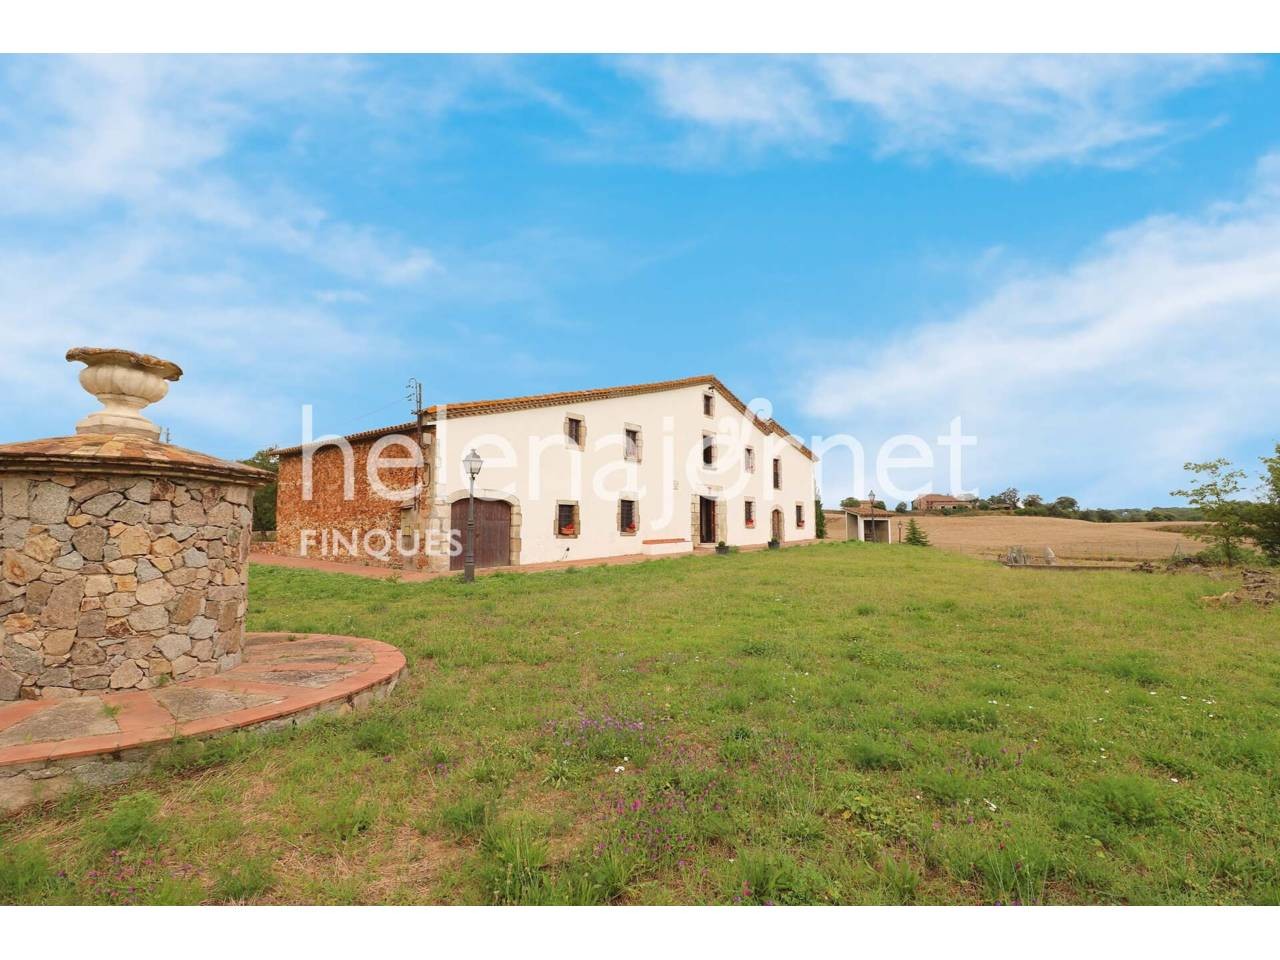 Catalan country house with 7Ha of land in Catalonia - 1558